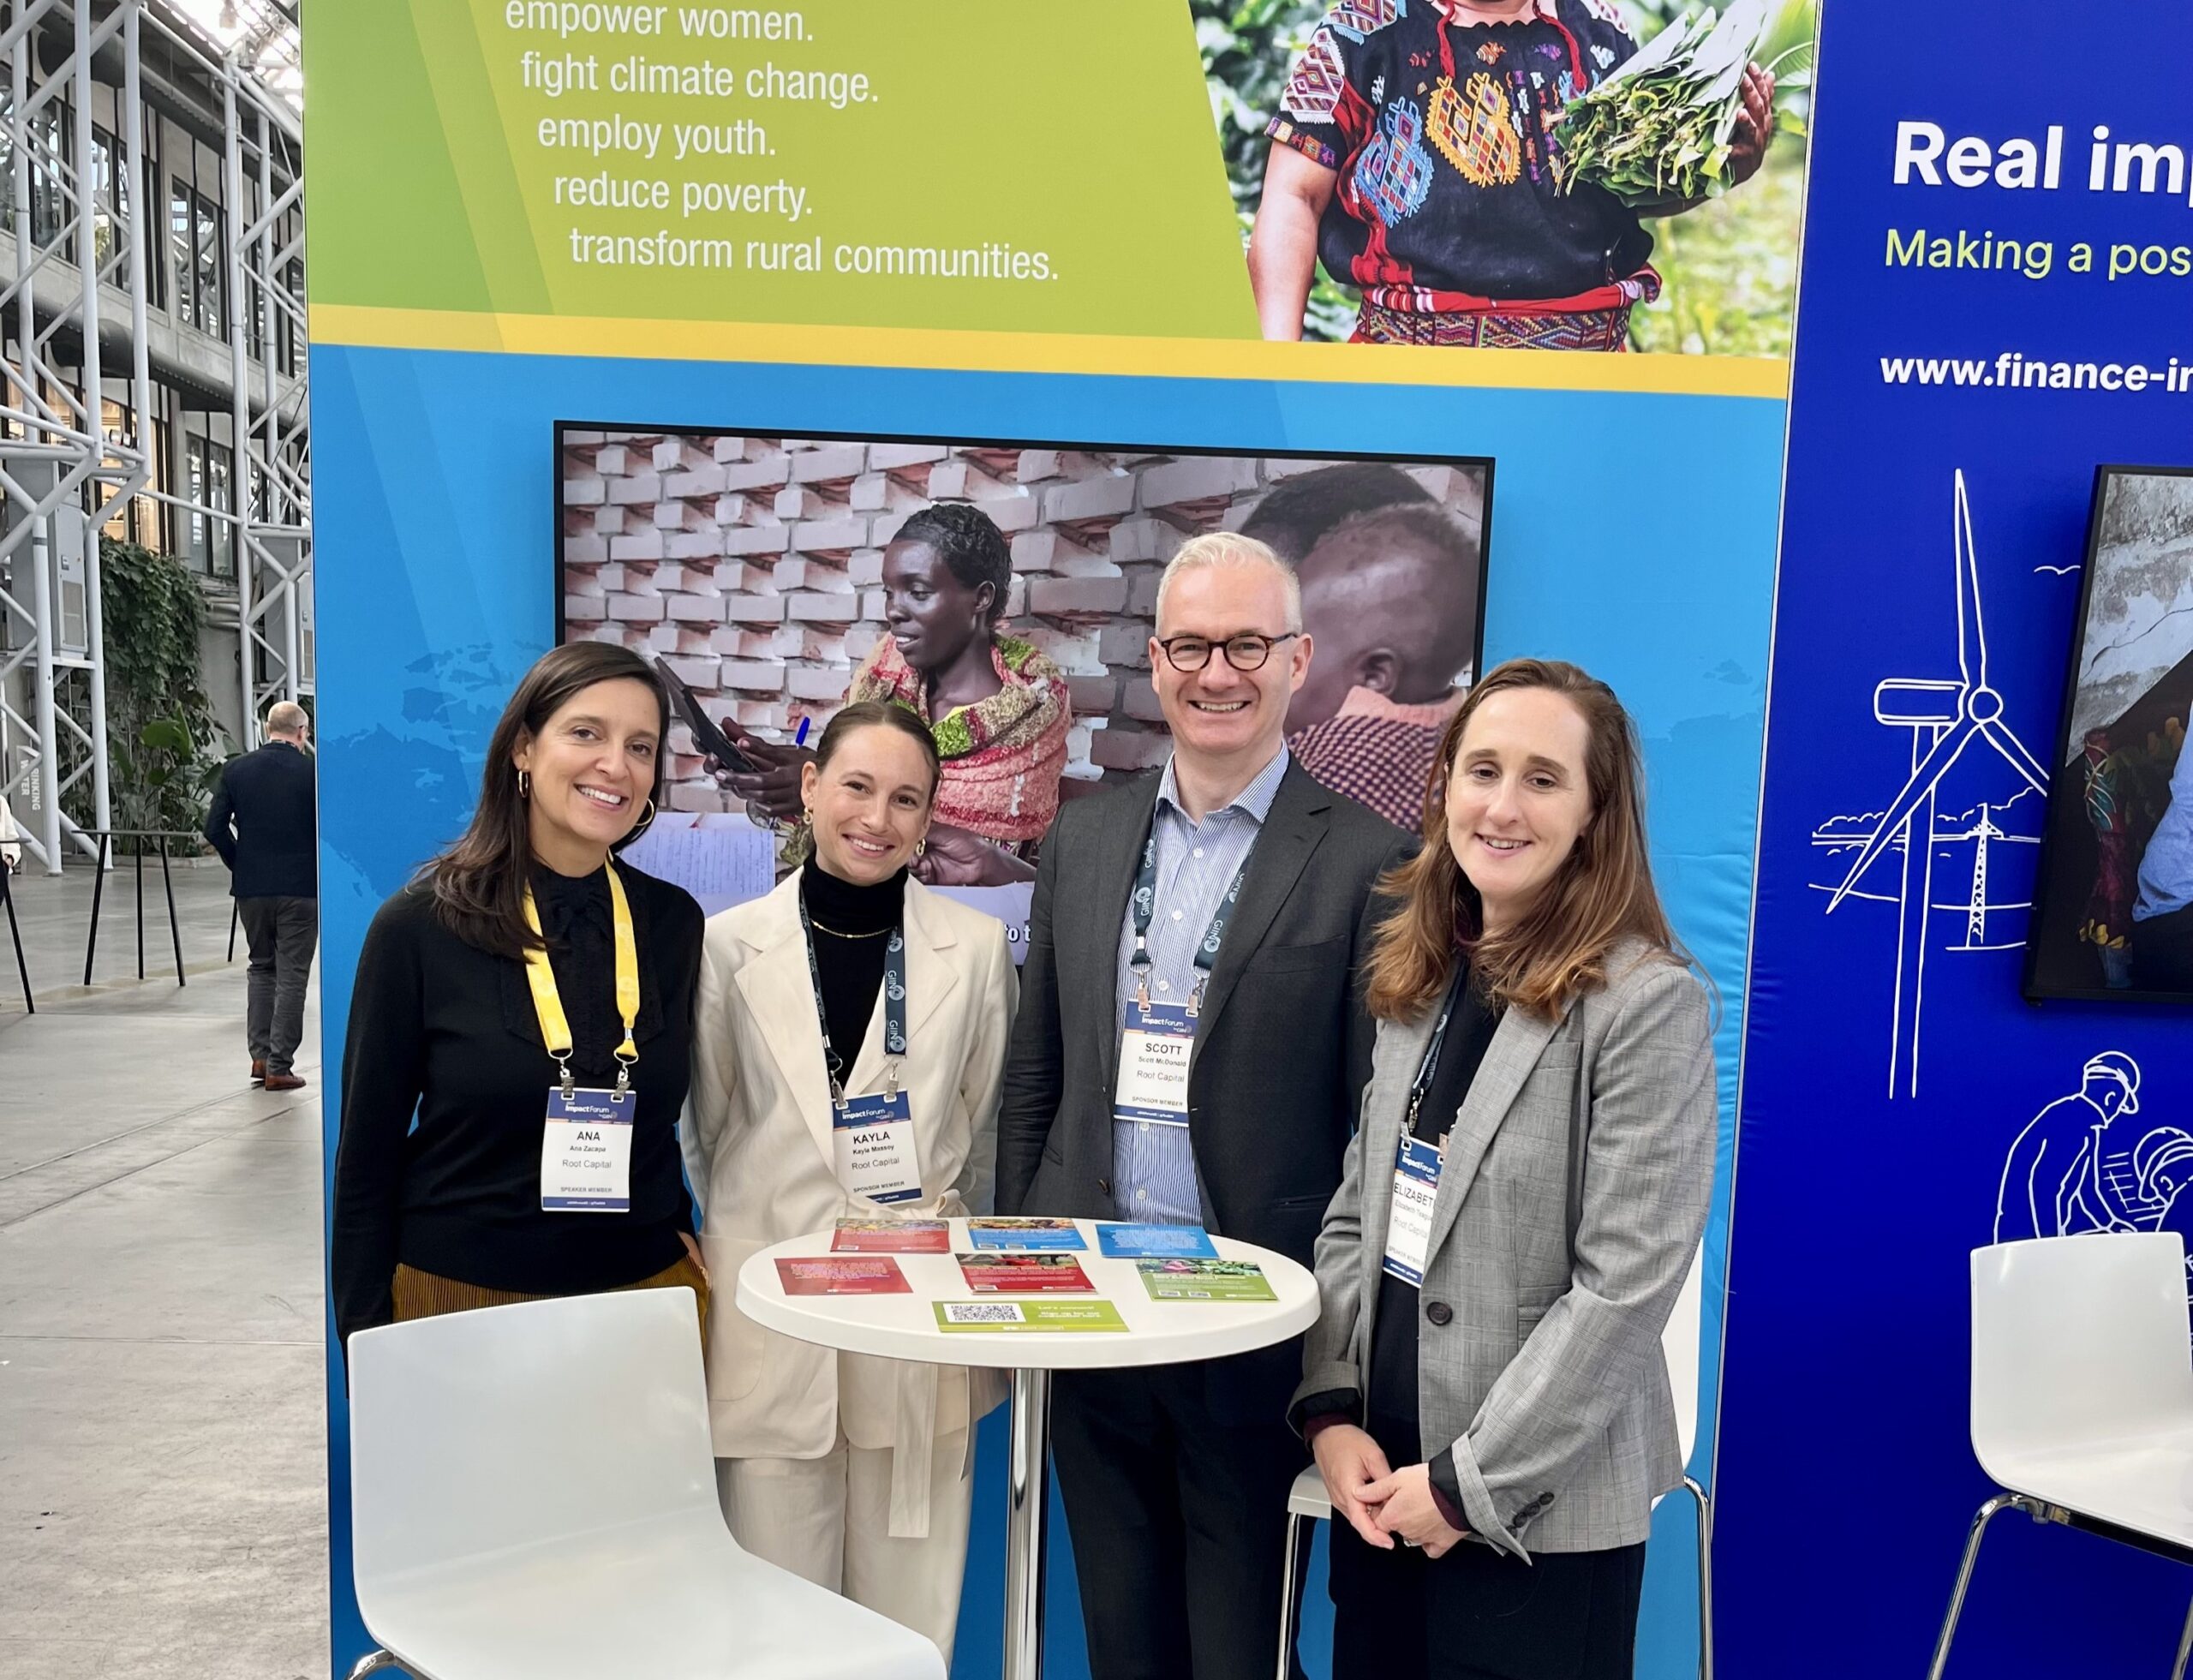  Ana Zacapa (Root Capital Chair Board), Kayla Massey (Senior Associate of Supporter Engagement), Scott McDonald (Chief External Affairs Officer), and Lizzie Teague (Director of Climate Resilience), pose at the Root Capital booth at the GIIN Forum hosted in Copenhagen in 2023. Credit: Root Capital.